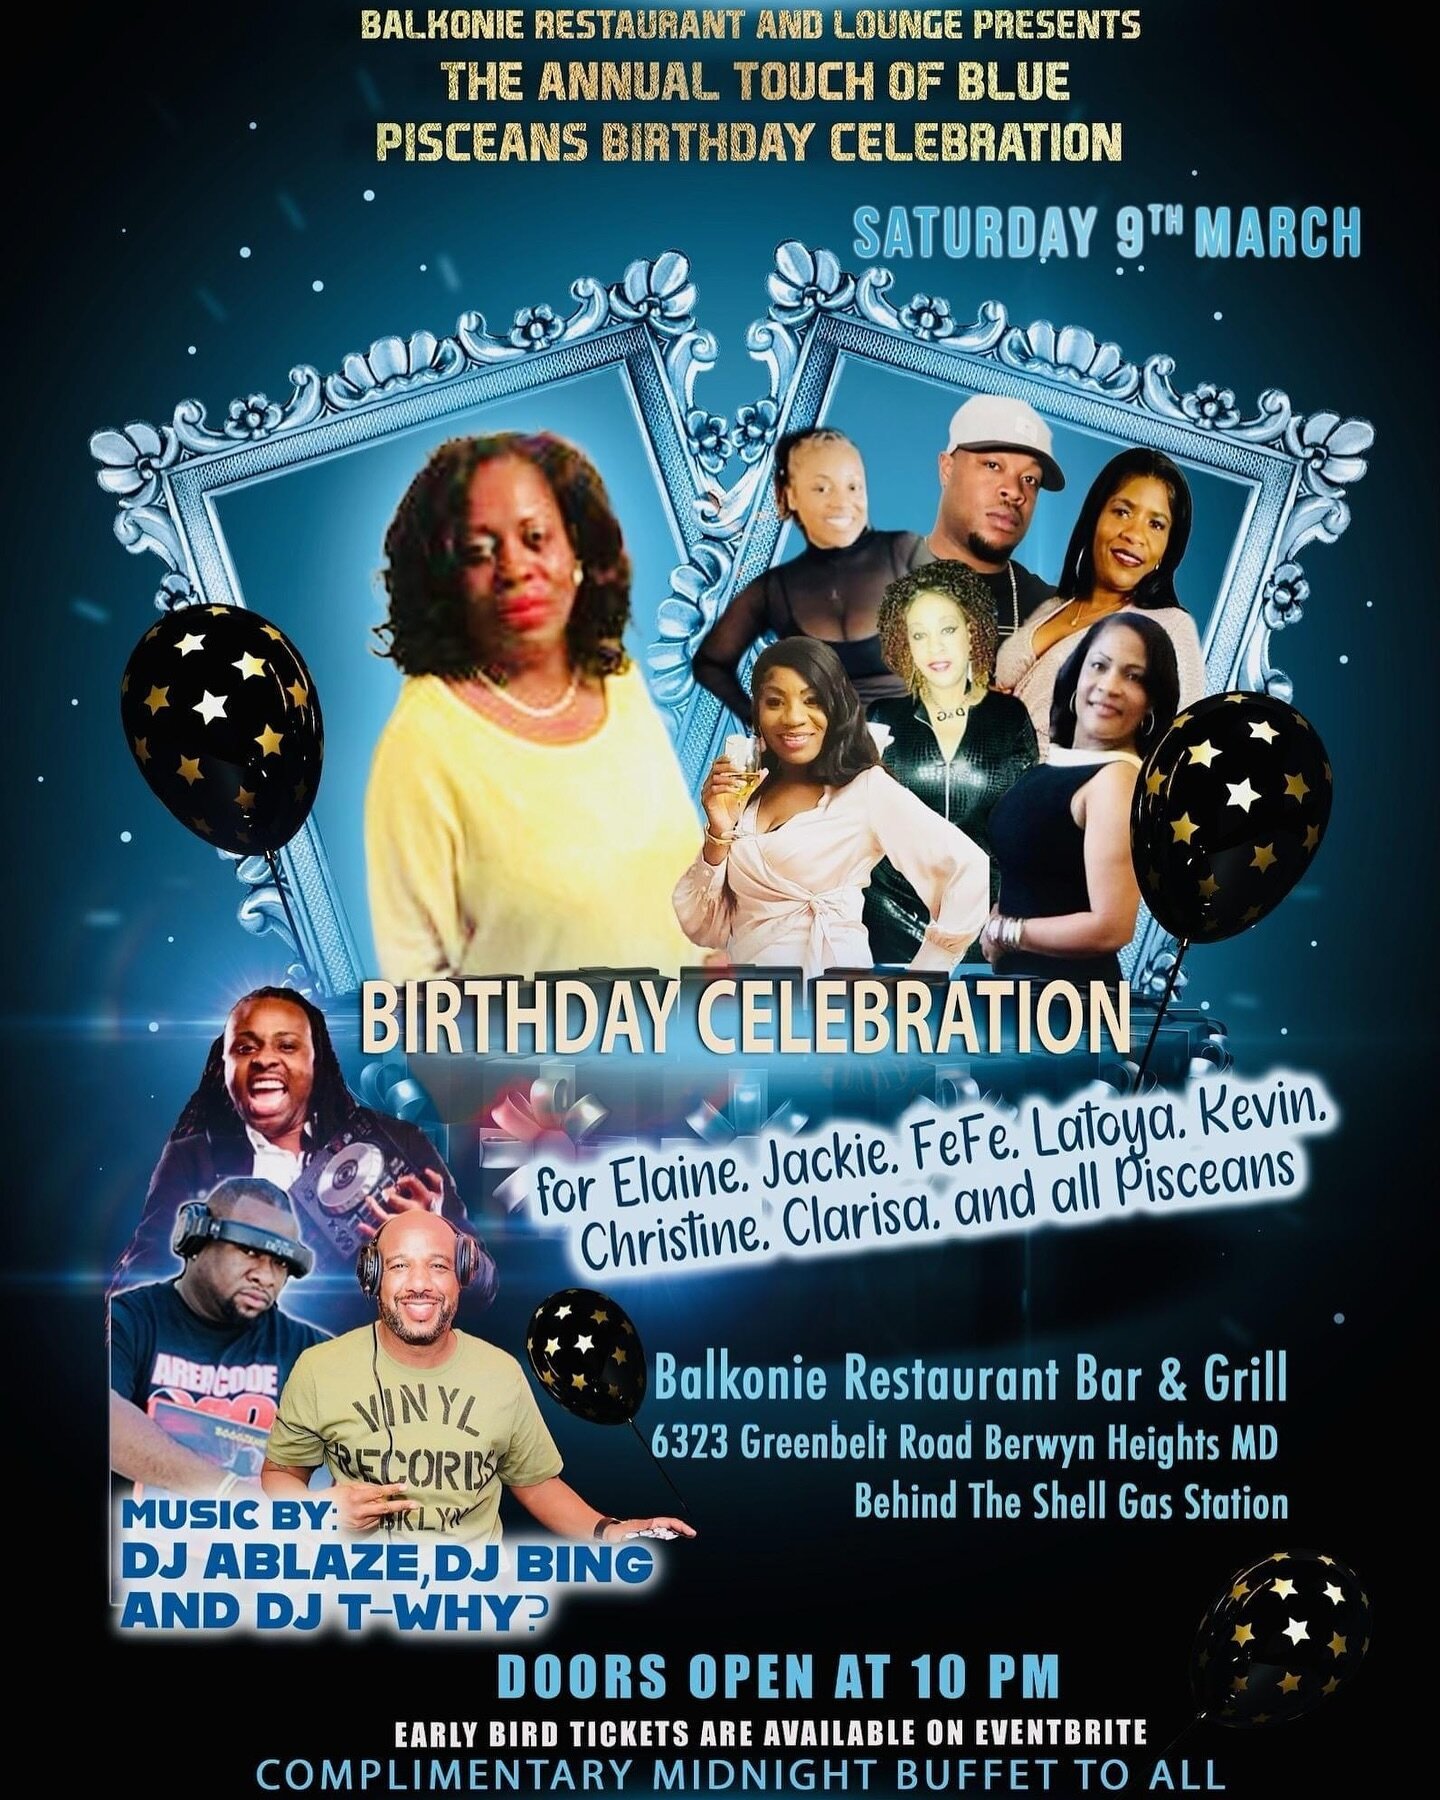 Balkonie Restaurant &amp; Lounge Presents

The Annual Touch of Blue Pisceans Birthday Celebration 

music by
DJ ABLAZE
DJ T-WHY?
DJ BING

📅 Date: March 9

⏰ TIme: Doors open at 10pm

📍Location: Balkonie Restaurant &amp; Lounge
6323 Greenbelt Road, 